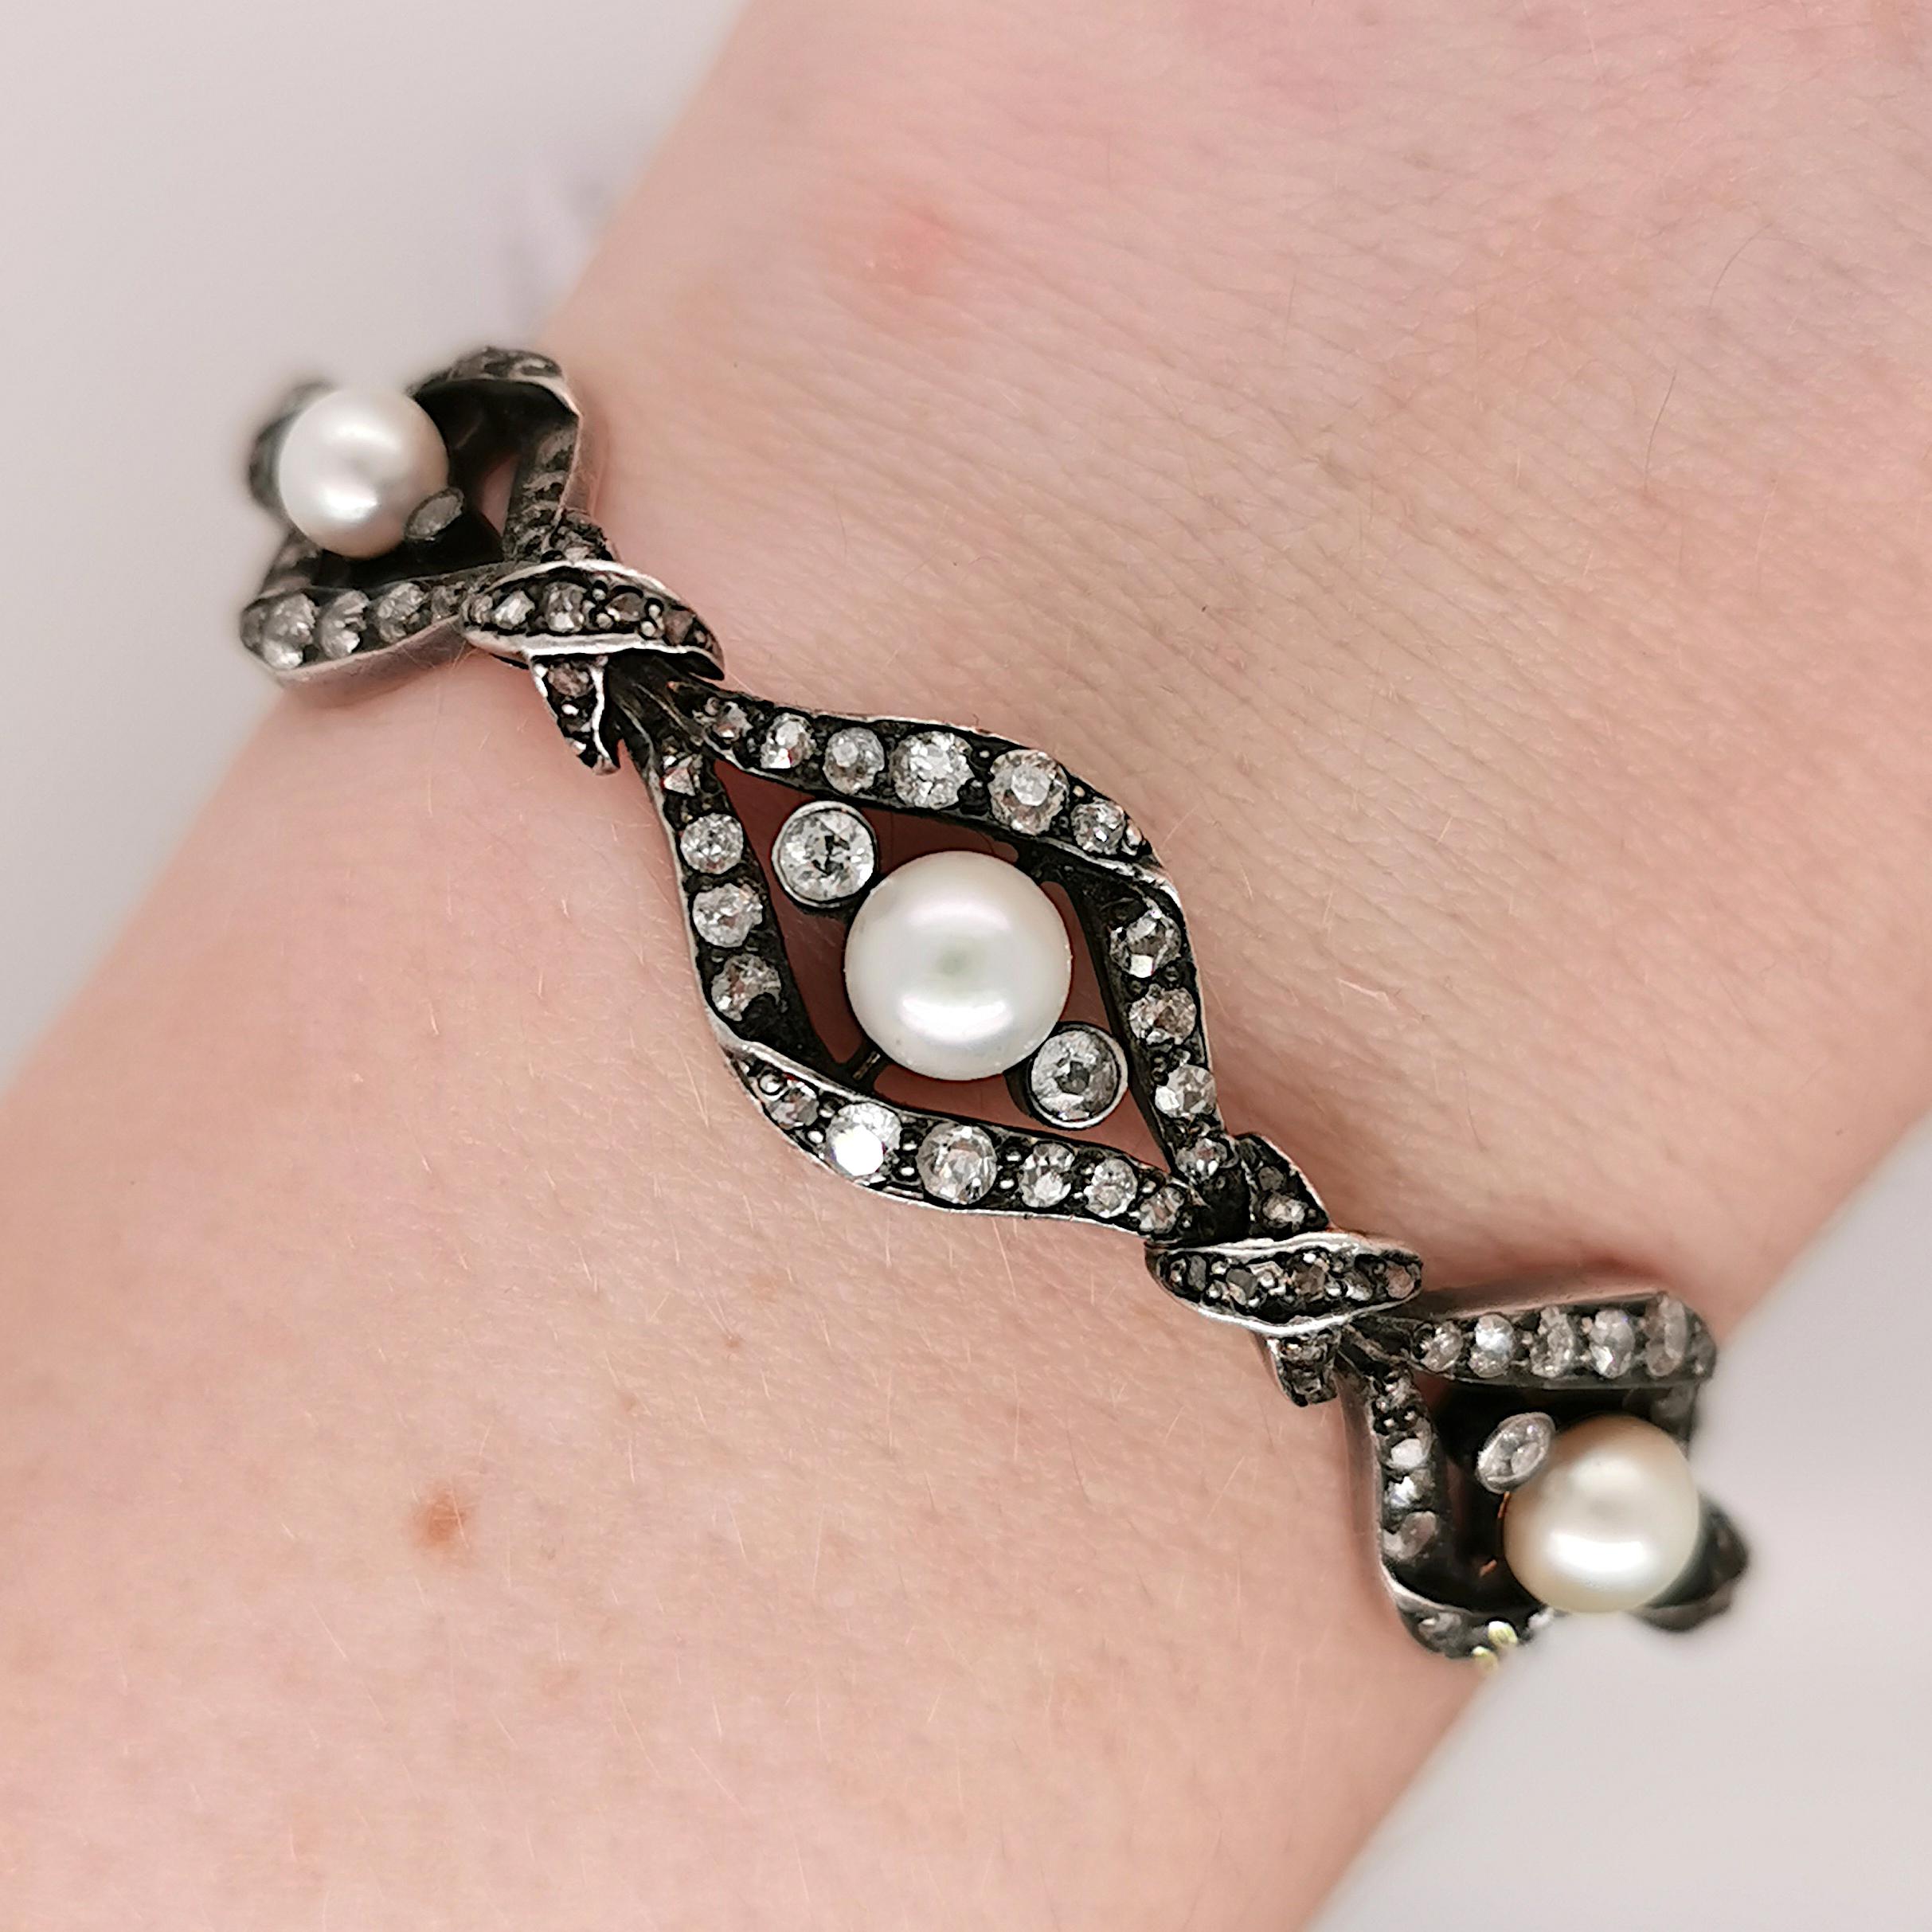 An antique, natural pearl and old-cut diamond bracelet, with eight links, with a natural pearl in the centre of each, measuring between 4-5mm, with a rub over set diamond either side and an old-cut diamond set twist surround, mounted in